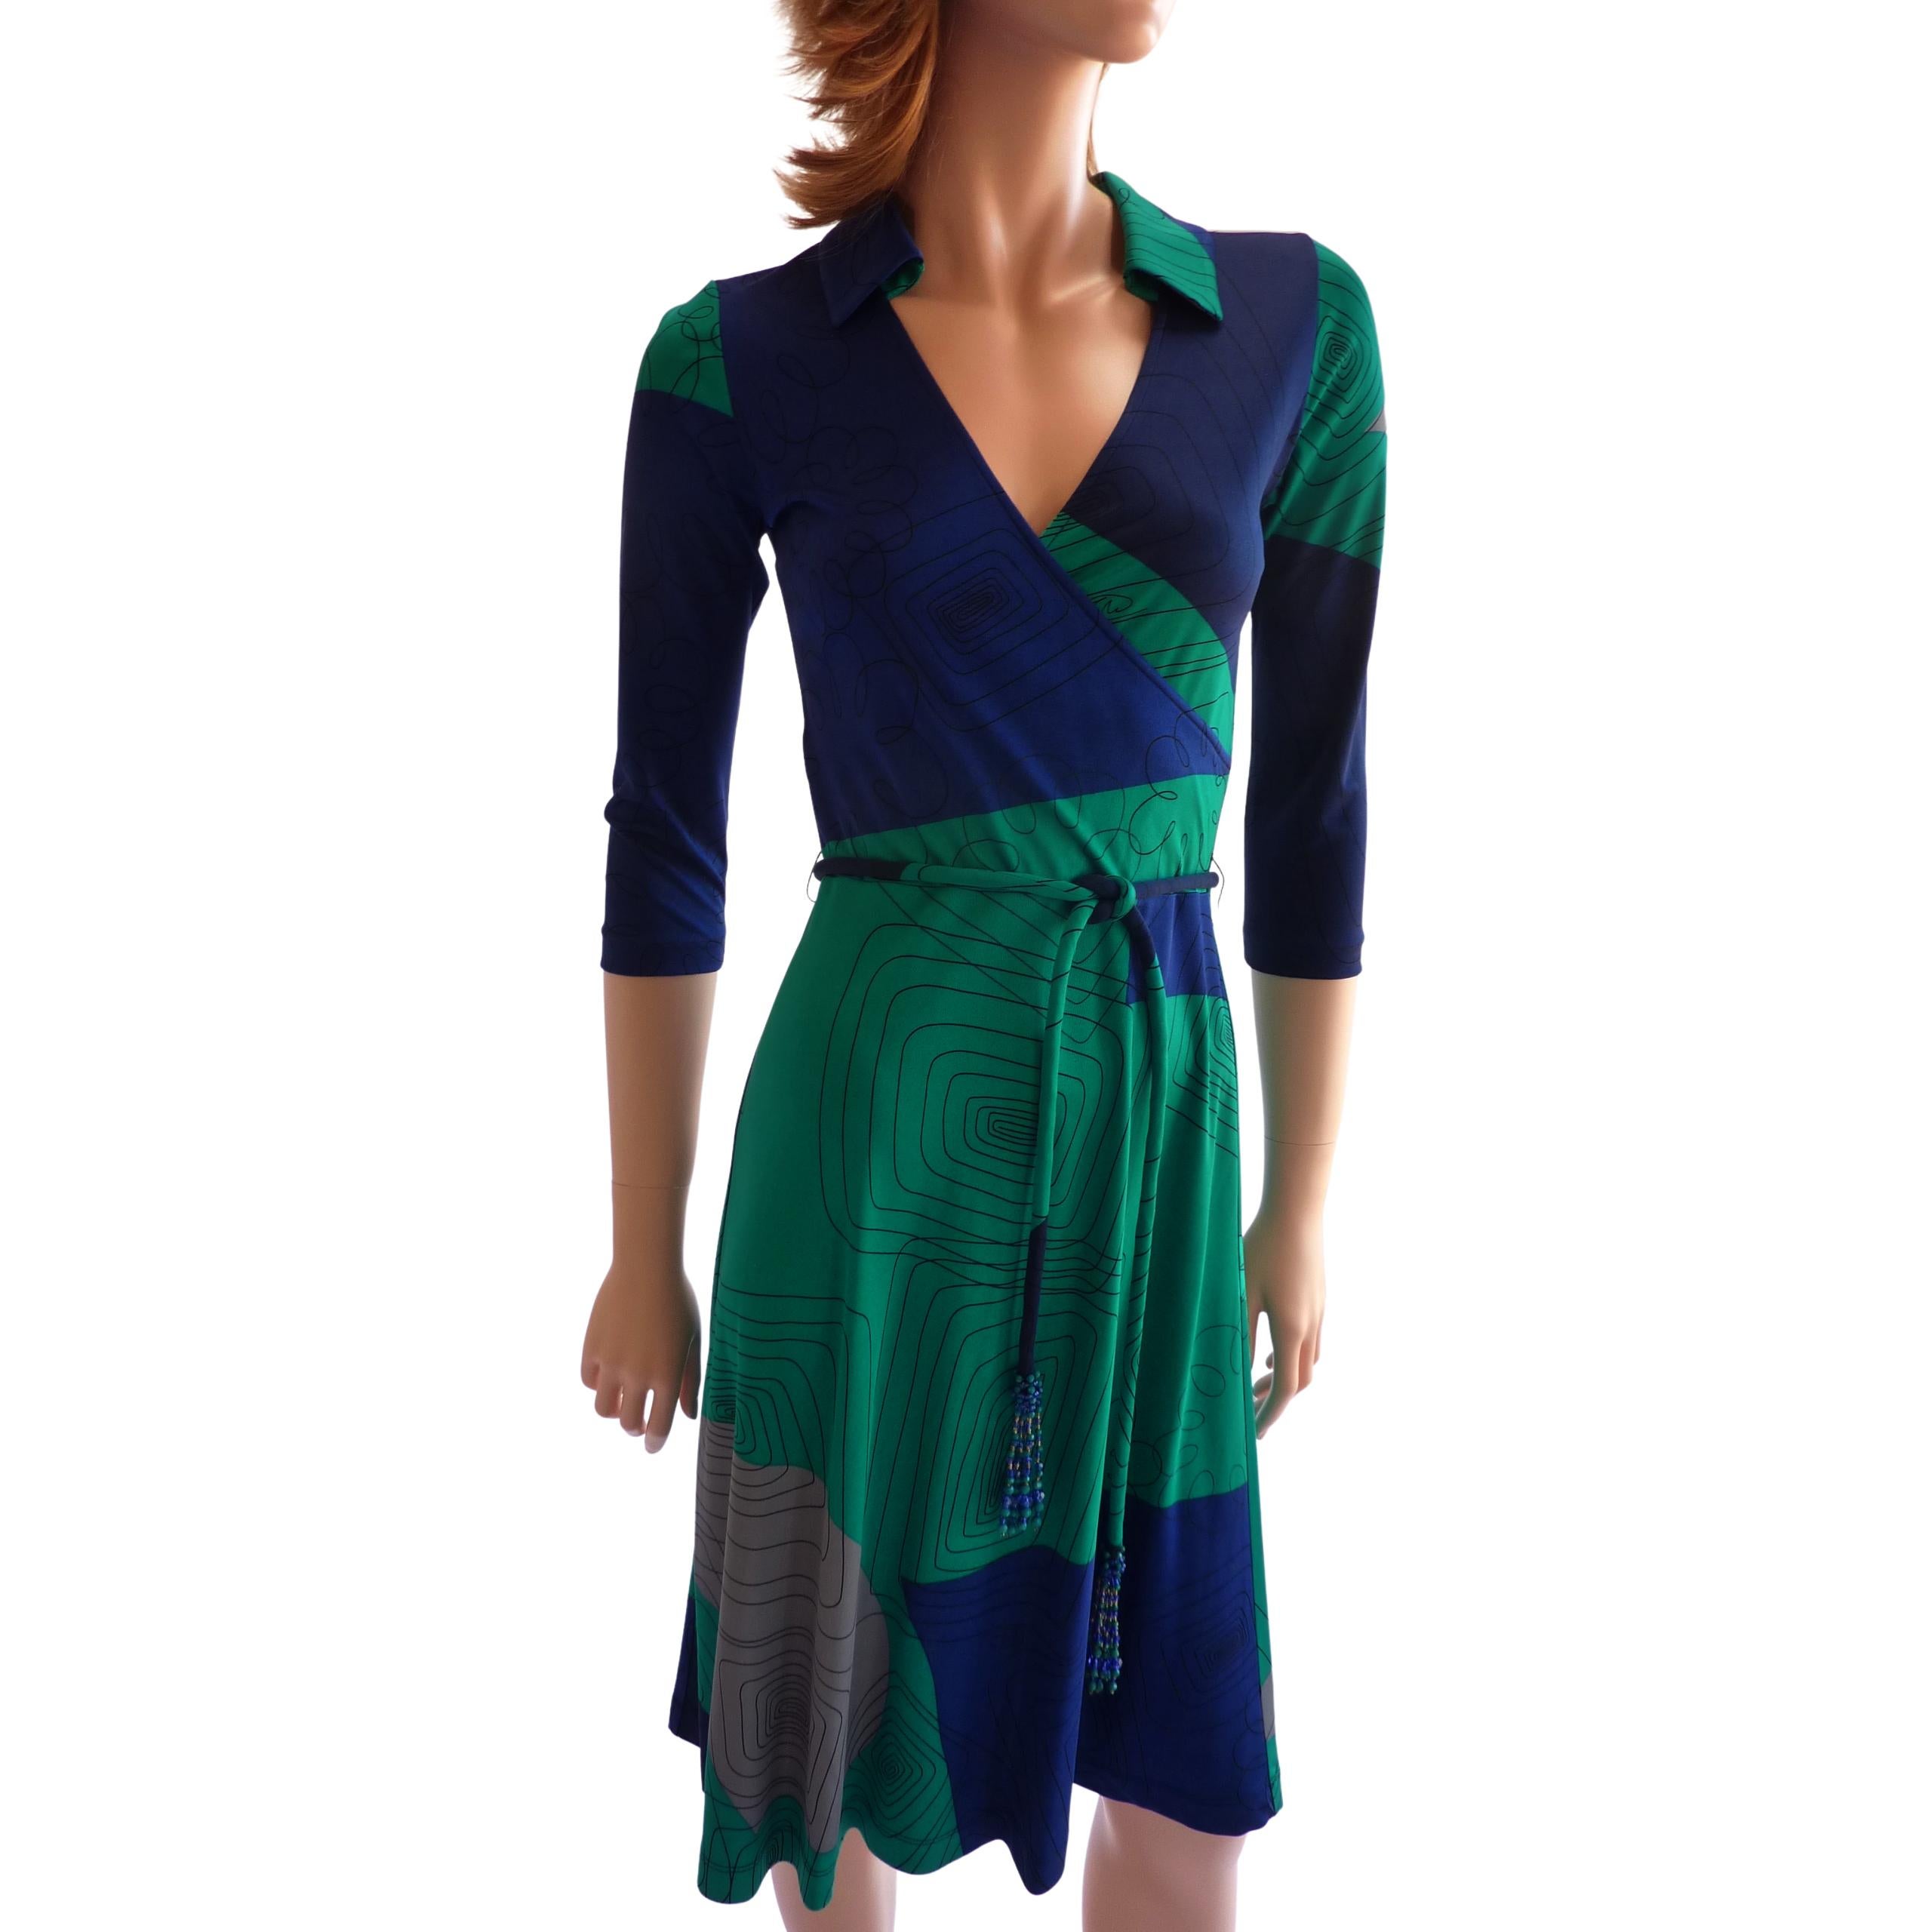 Mock wrap shirt-collar dress with A-line skirt and 3/4 sleeves.
Original fine line black scribbles on blue jade gray and navy ground from Flora Kung.
Detachable cord belt with blue beads–can be switched to a day belt for a more casual